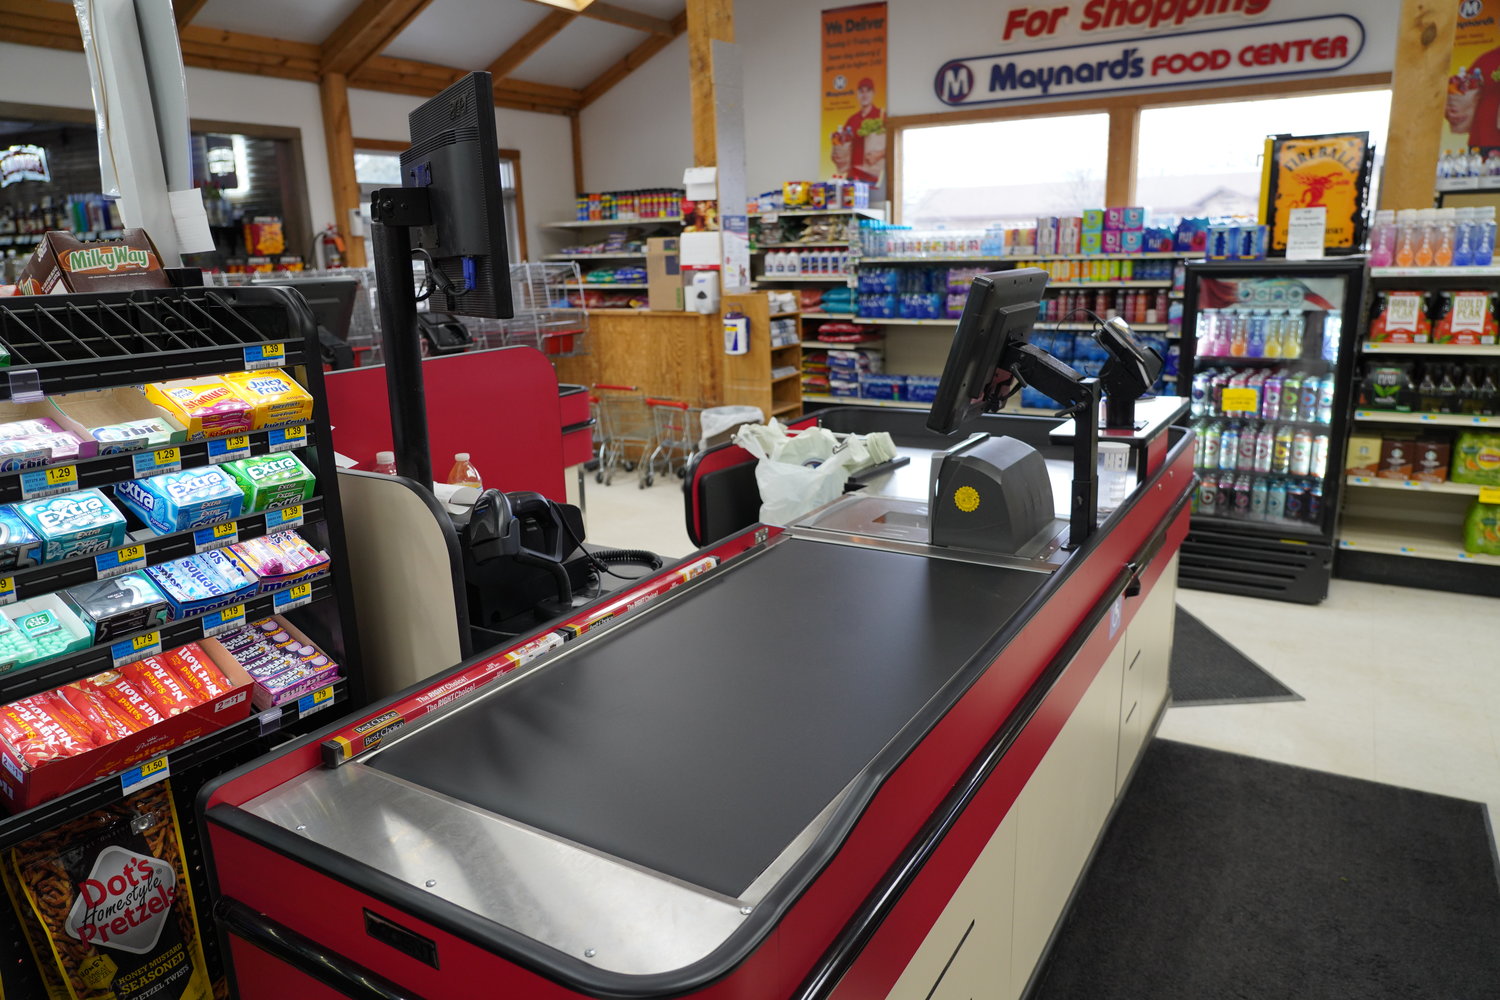 Maynard’s Grocery Store in De Smet has recently installed new check-out counters, thanks to some help from Kingsbury Electric. The new counters include a slide-out desk for patrons in wheelchairs, a conveyor belt, and the back end is sloped to allow the groceries to slide/roll away from the cashier. Store Manager Bob Blaha says feedback from cashiers has been positive, and the new system is great for their backs. Other changes in store for Maynard’s include improvements to the produce section, the arrival of new carts in about a month and an upgrade for the candy and impulse buy shelves in front of the registers.